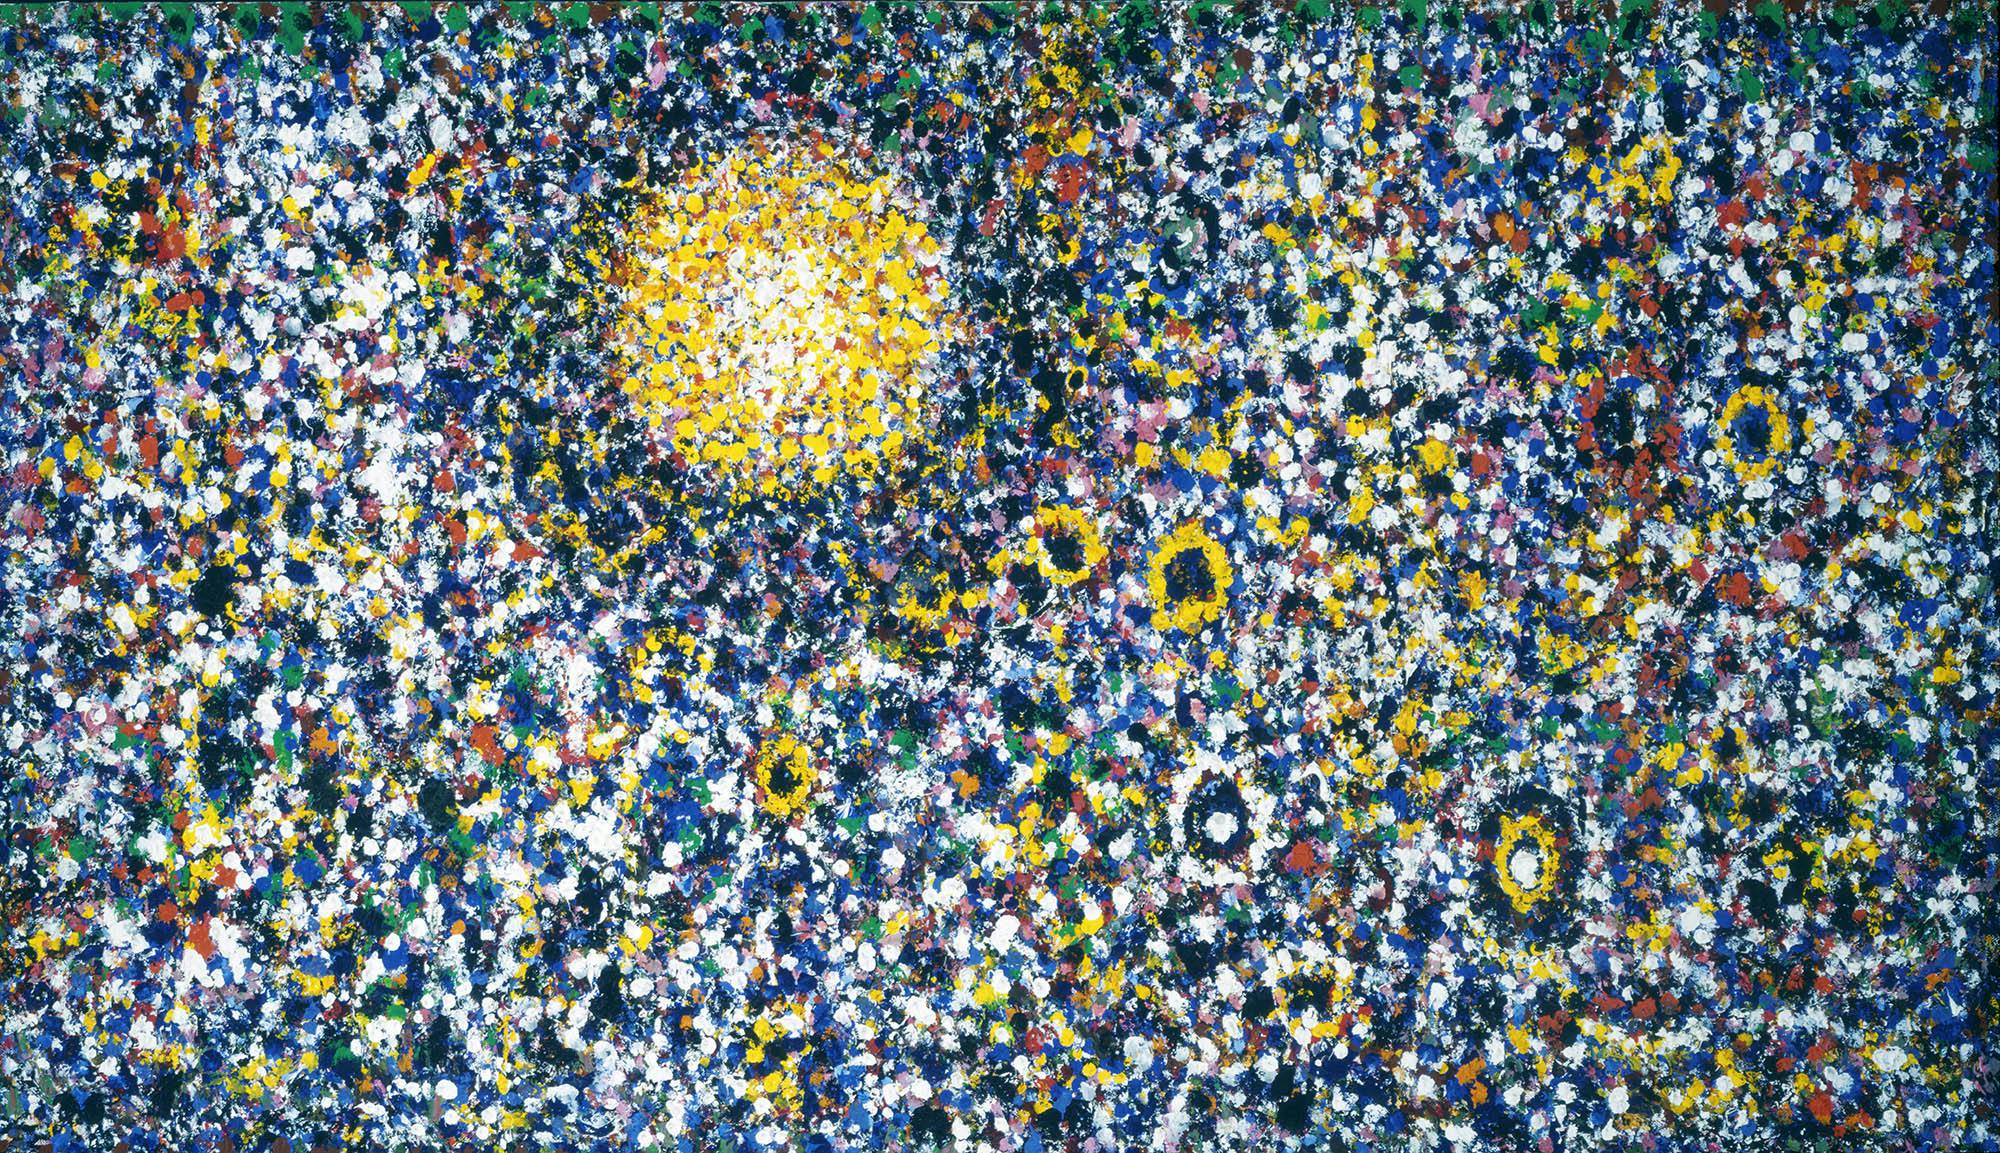 _Dance of Earth and Stars_, 1987–90, acrylic on linen, 42 x 72 in. (106.7 x 182.9 cm), The White House Collection
 – The Richard Pousette-Dart Foundation